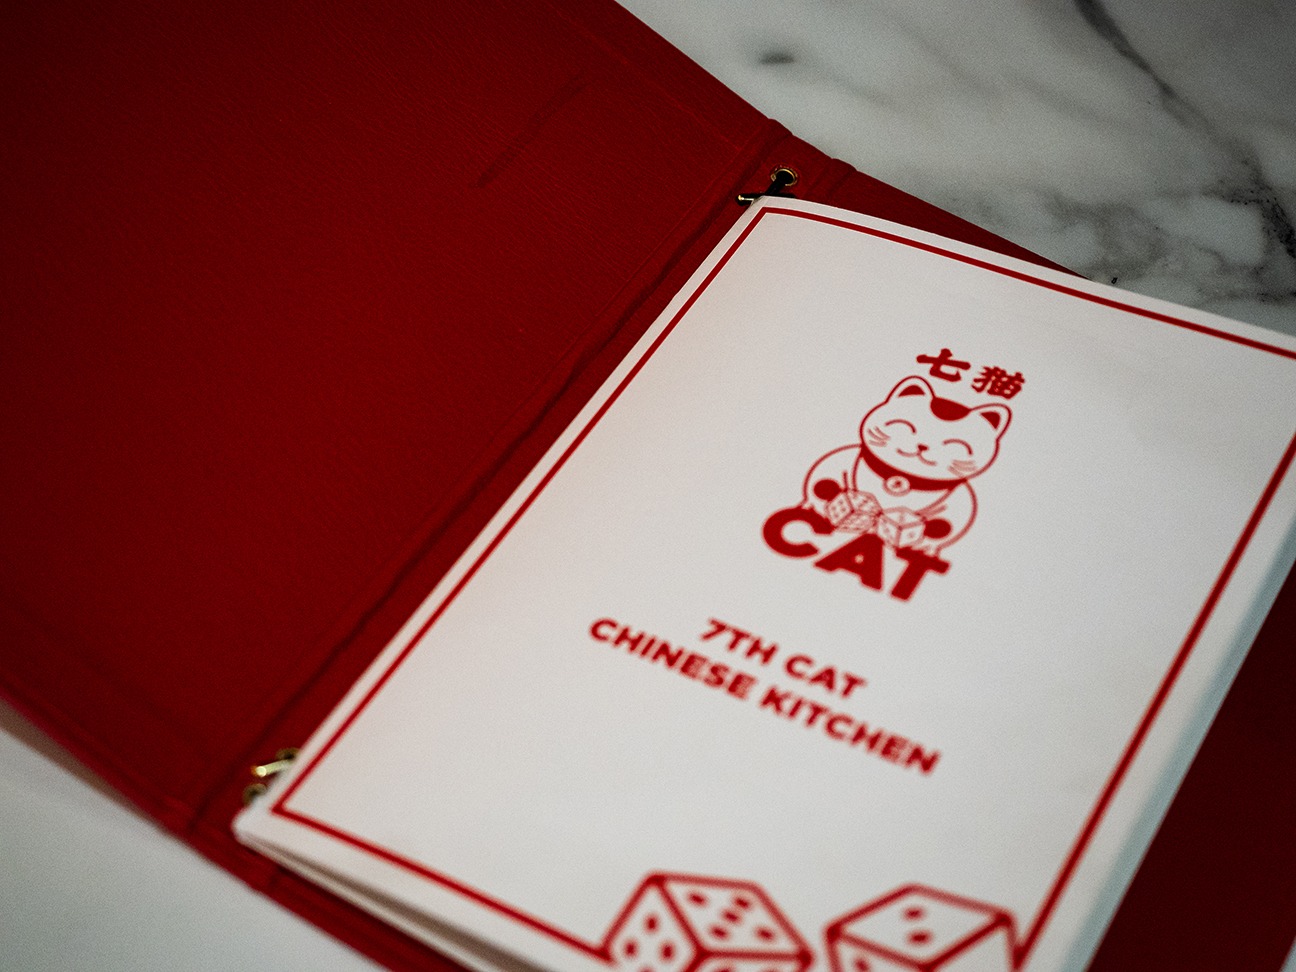 7th Cat Chinese Kitchen